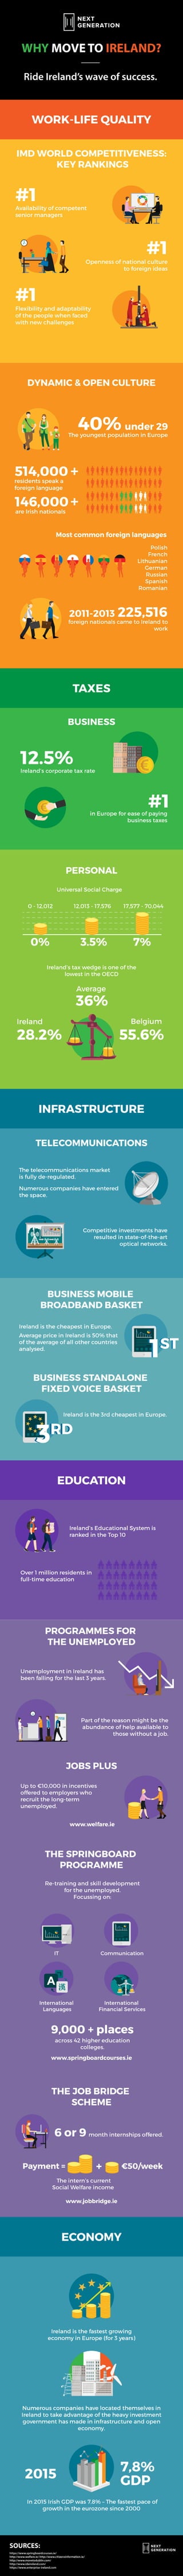 Why Move to Ireland Infographic Next Generation